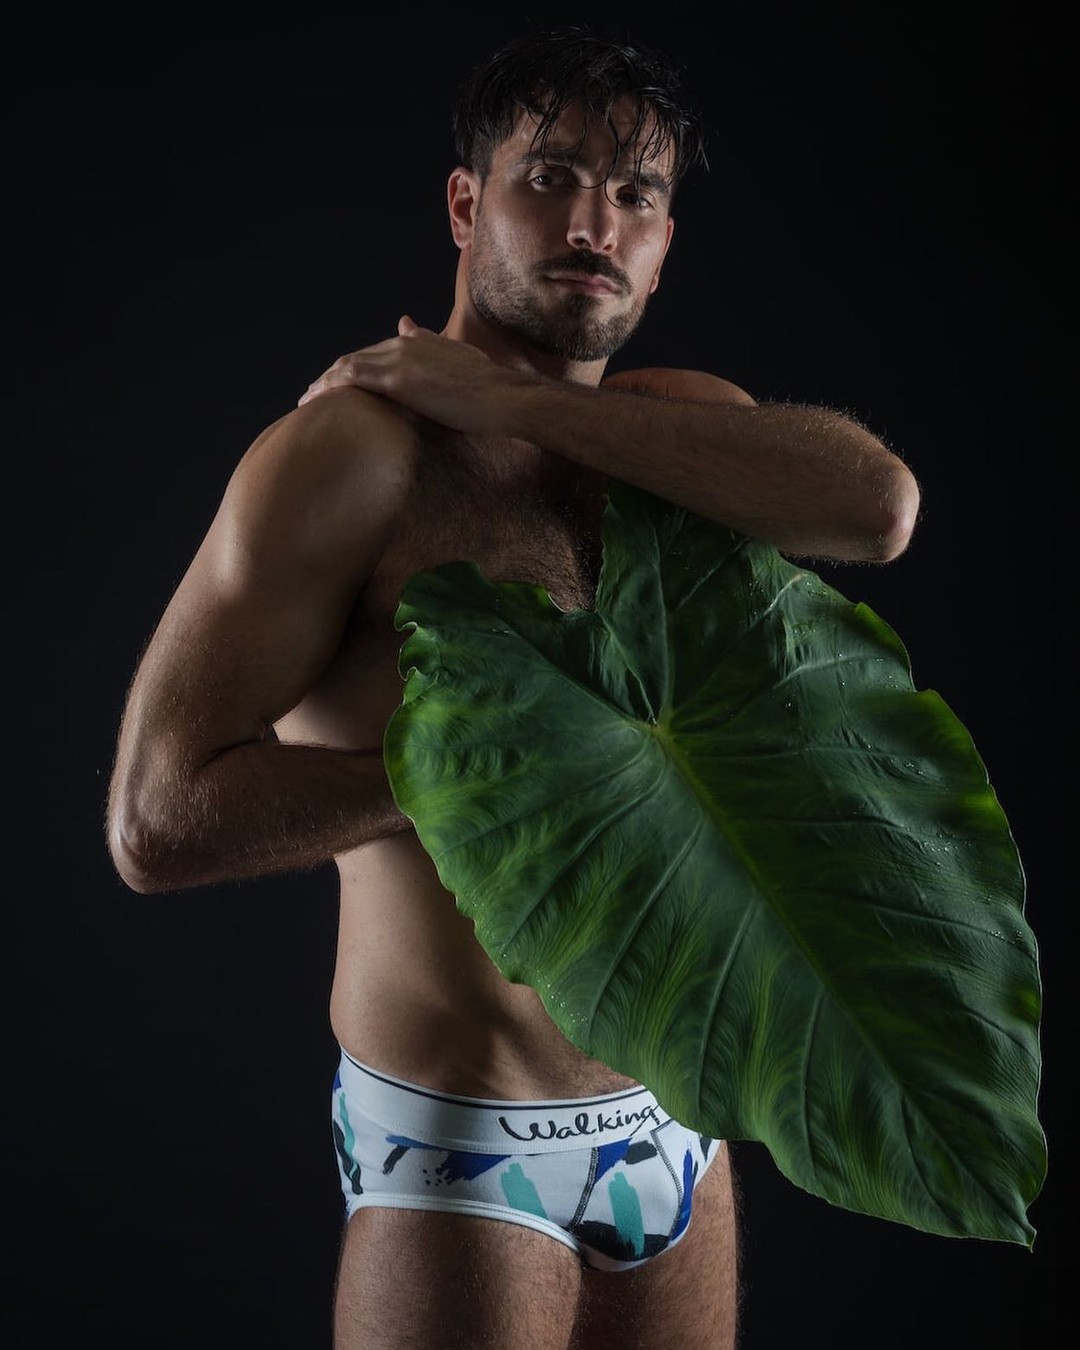 Exclusive: Model Rodolfo featuring Colocasia and Walking Jack – Photography by Markus Brehm. See more:
_____
http://www.menandunderwear.com/2022/01/exclusive-rodolfo-featuring-colocasia-and-walking-jack-photography-by-markus-brehm.html